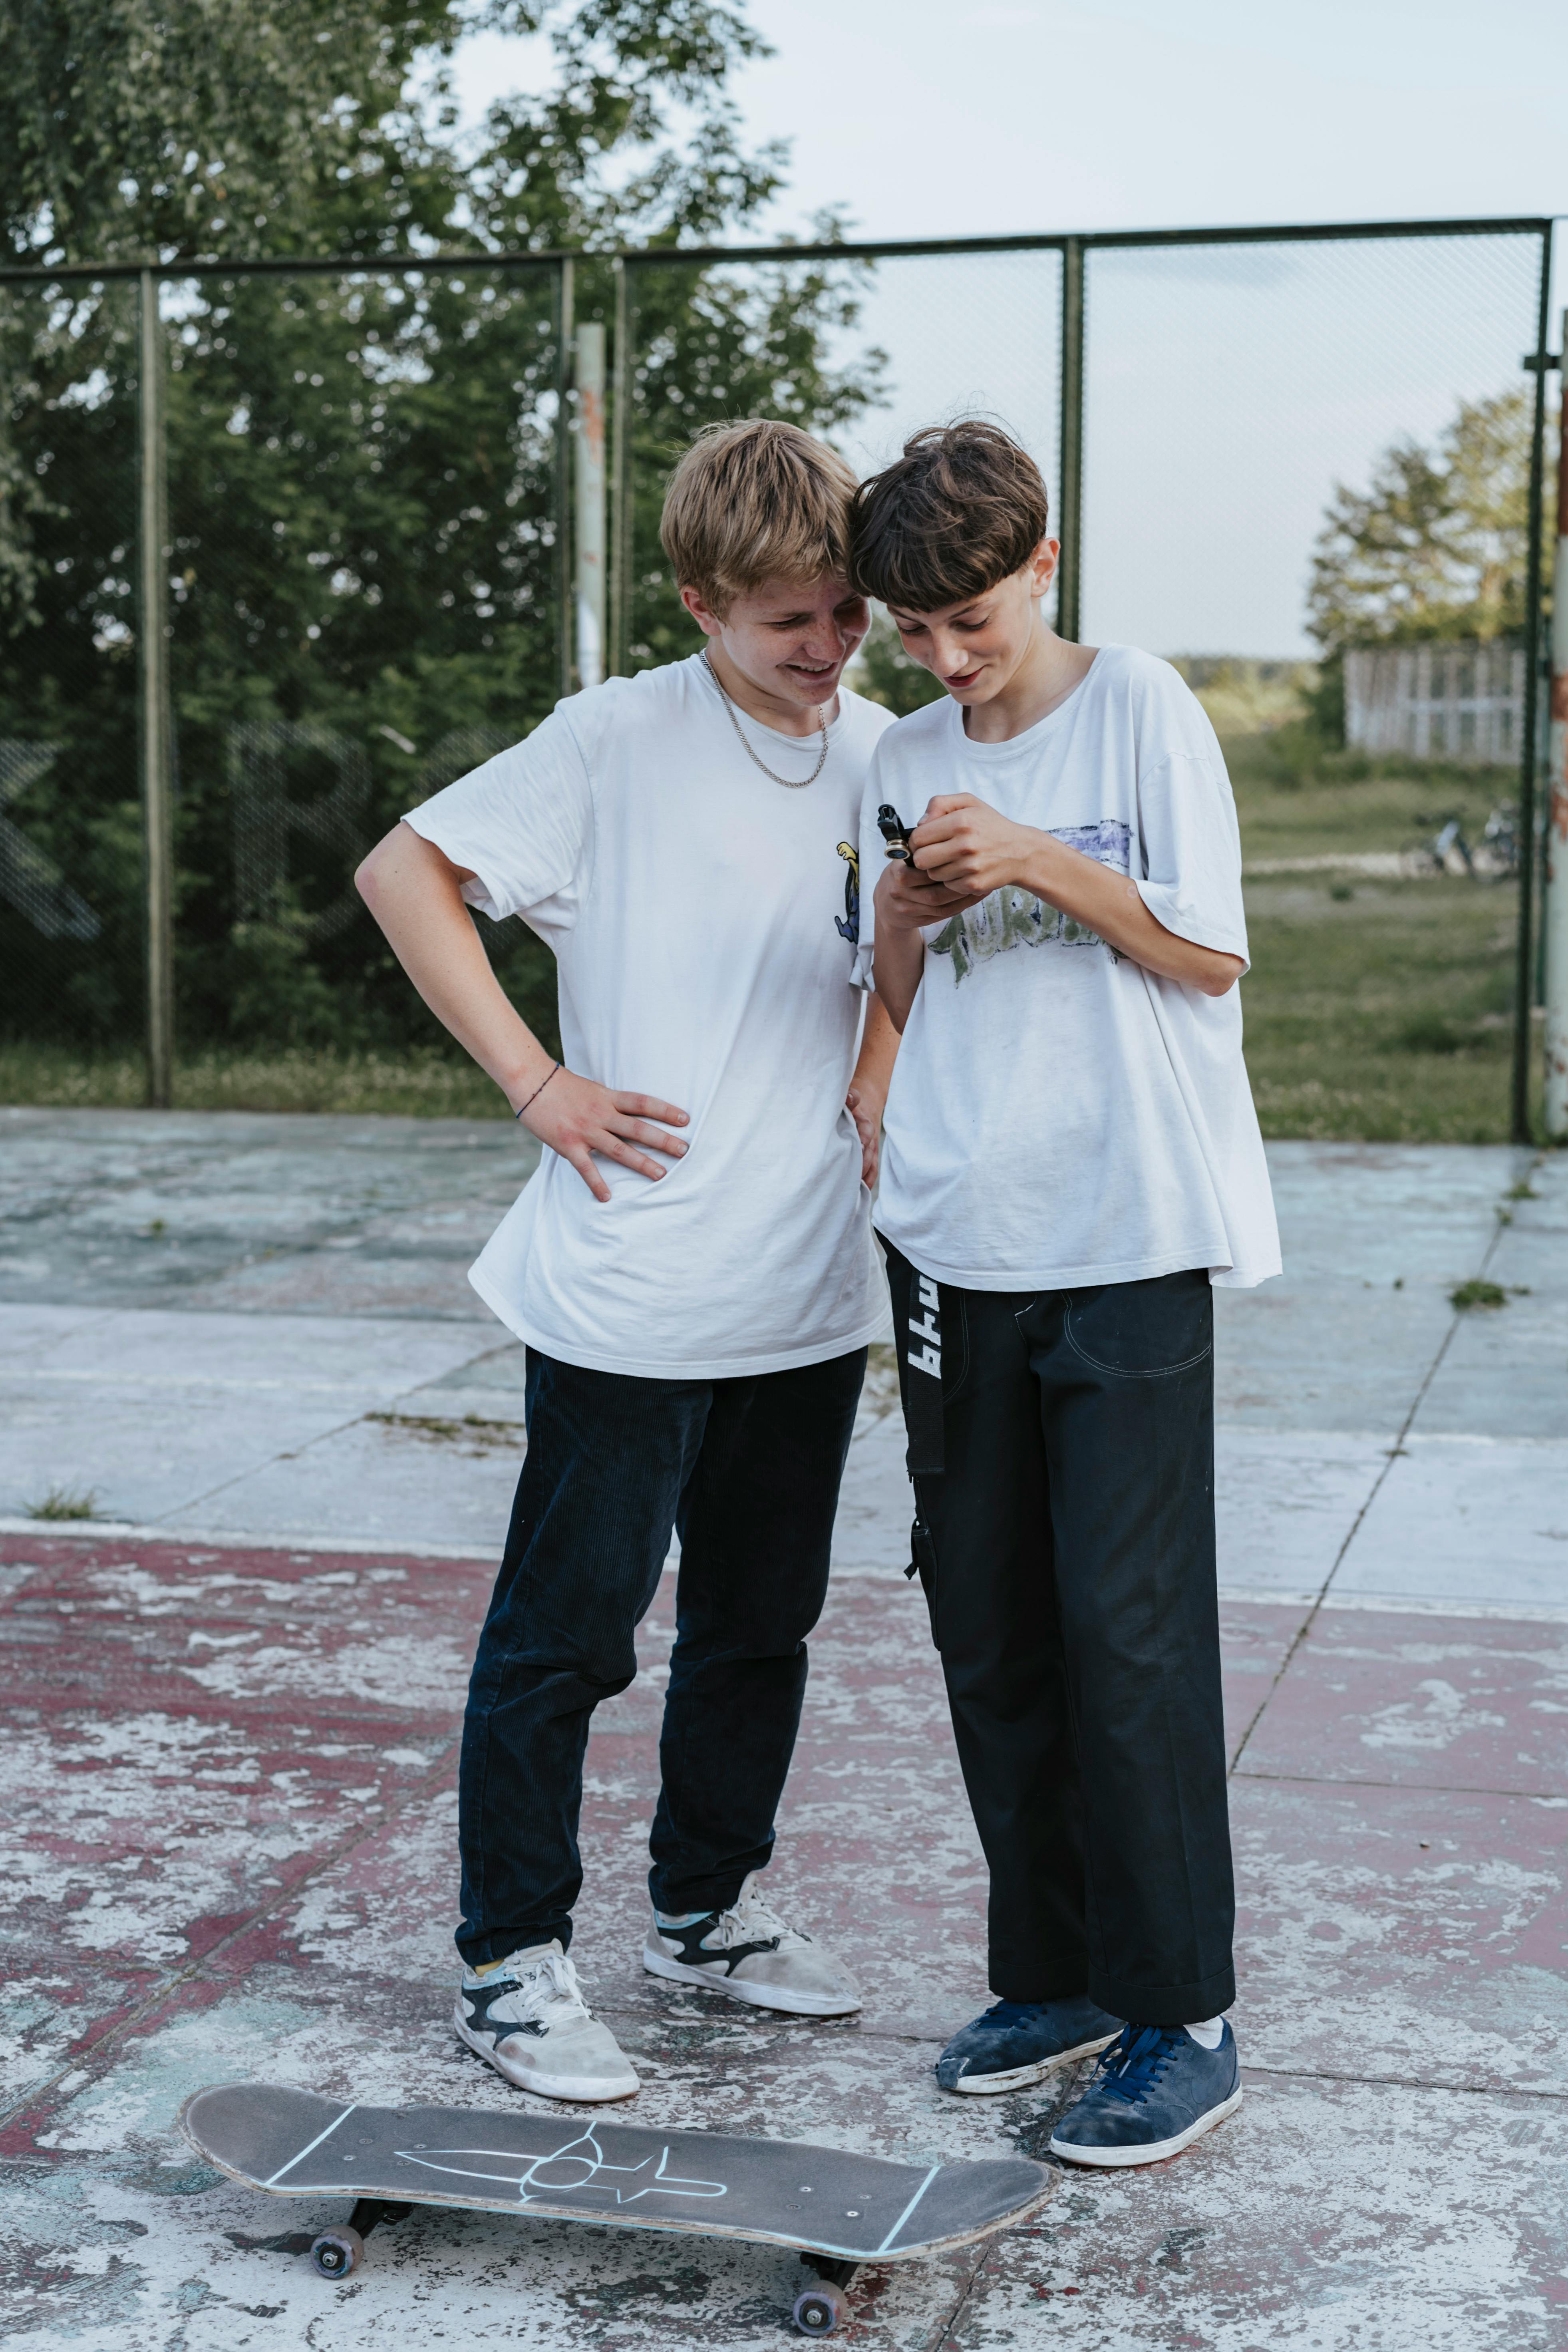 Two teenage boys outdoors in white t-shirts | Source: Pexels